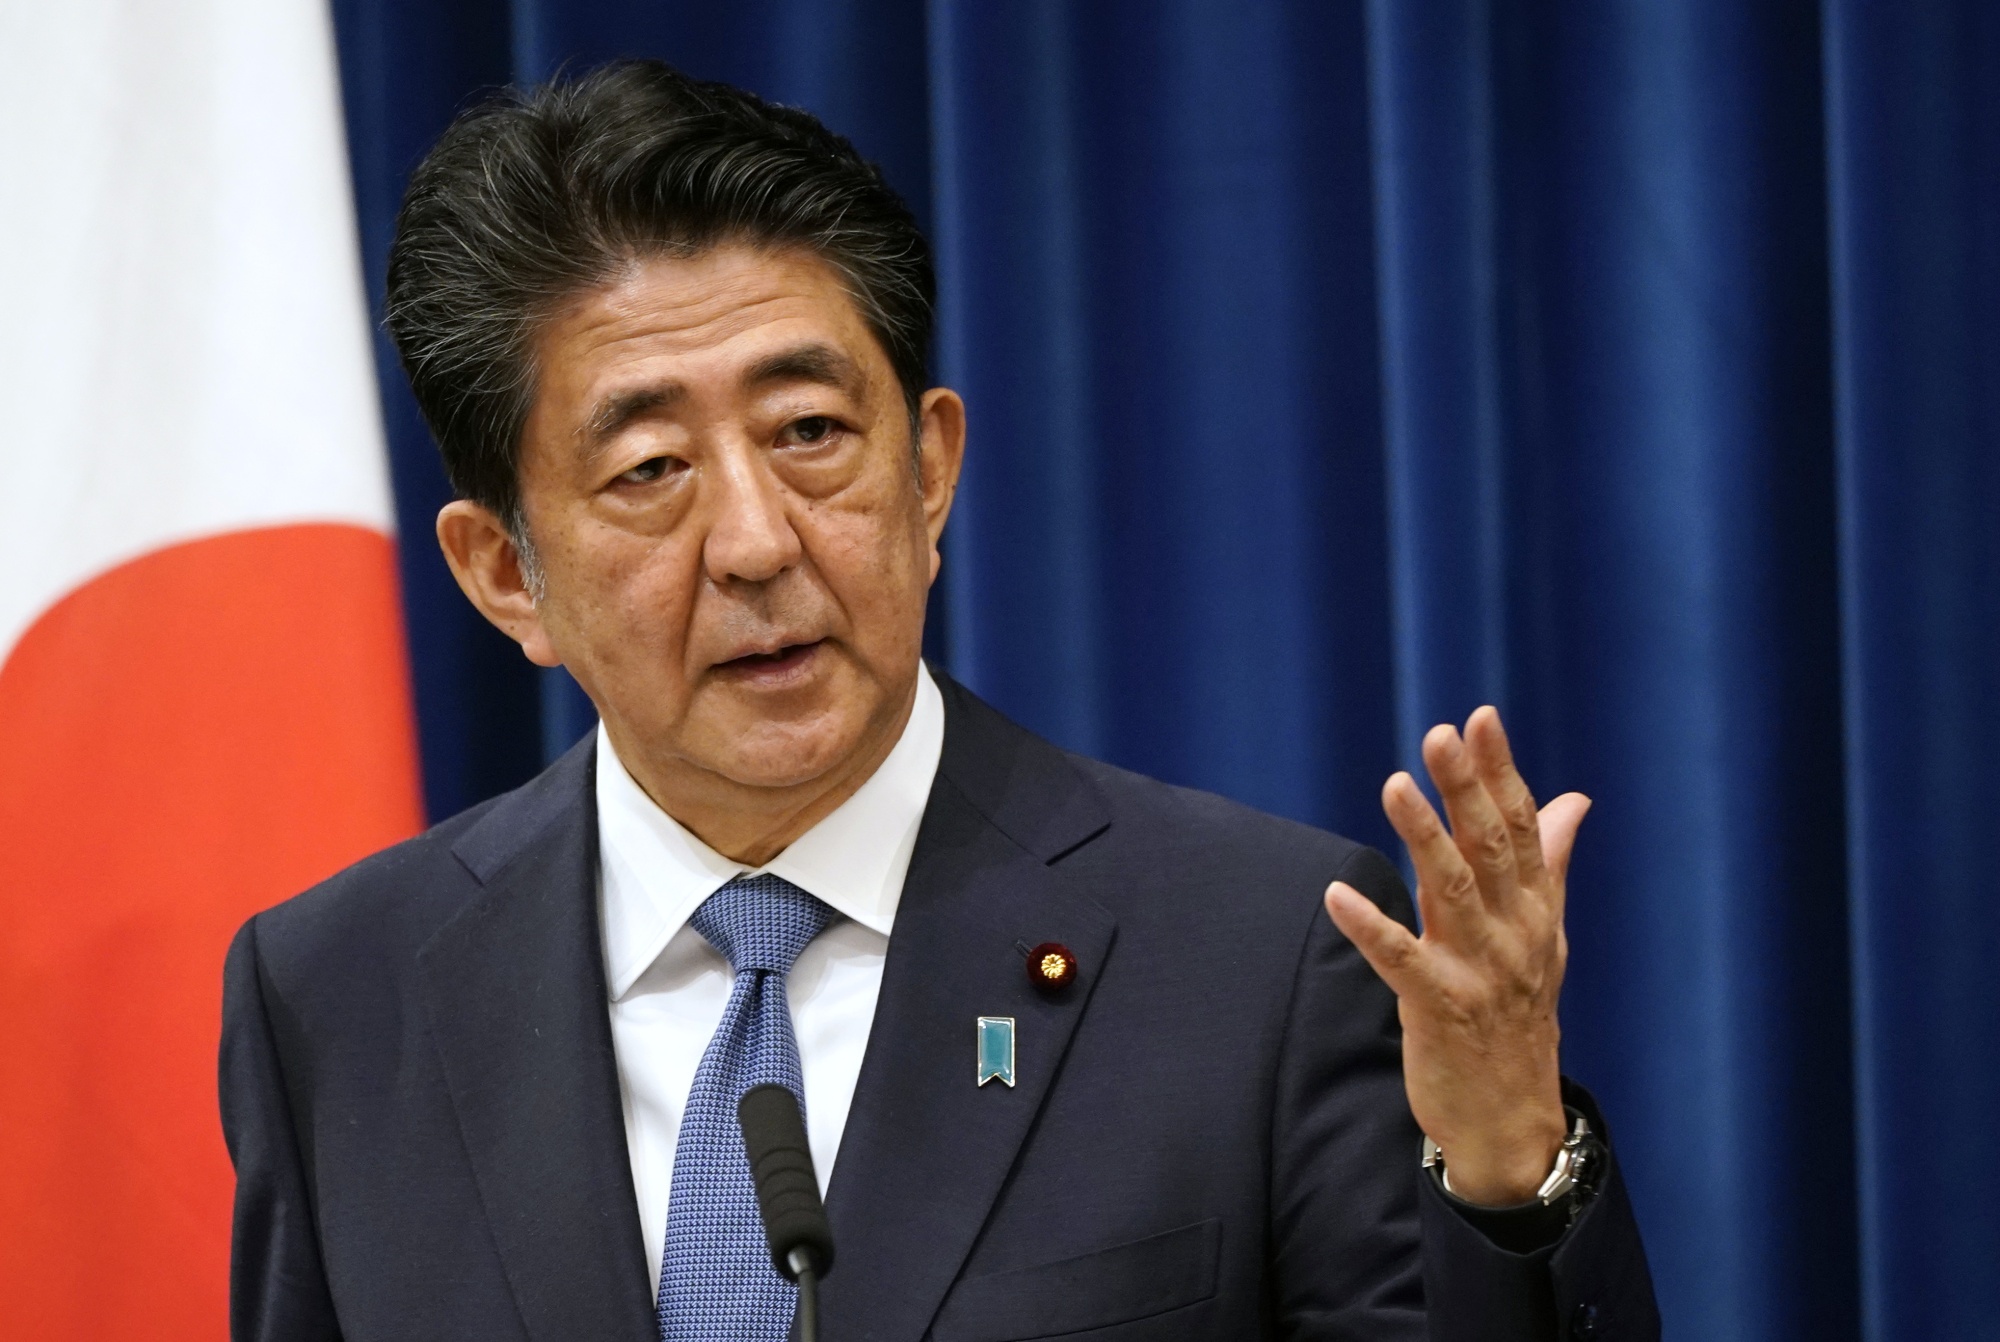 Locals who tackled suspect say lack of security for Japanese PM